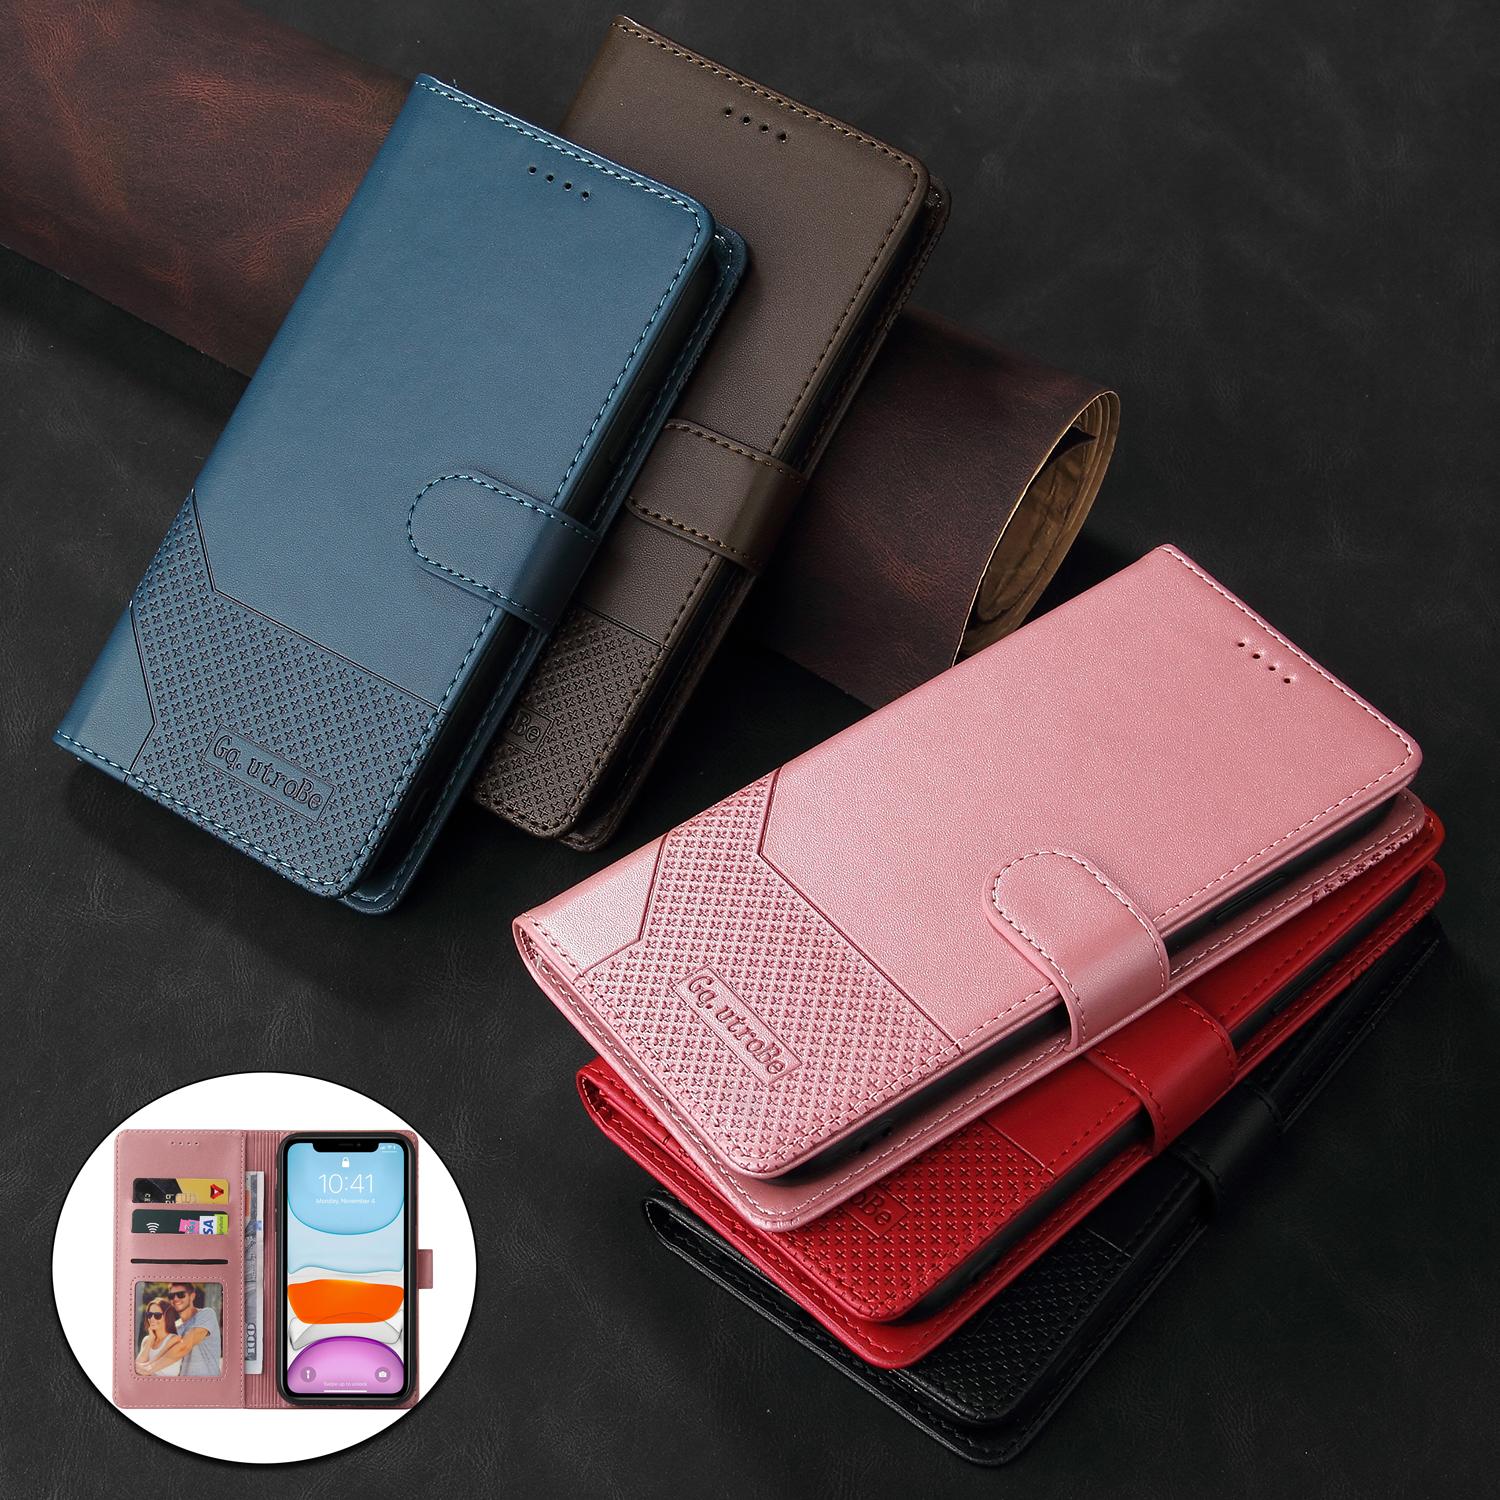 U Mobile Phone Case Leather Folio Flip Cover Credit Card Holder Soft TPU Shell Protective Book Folding Case For Samsung Galaxy S8 S9 S10 S20 A10 A20 A40 A50 A70 A51 A71